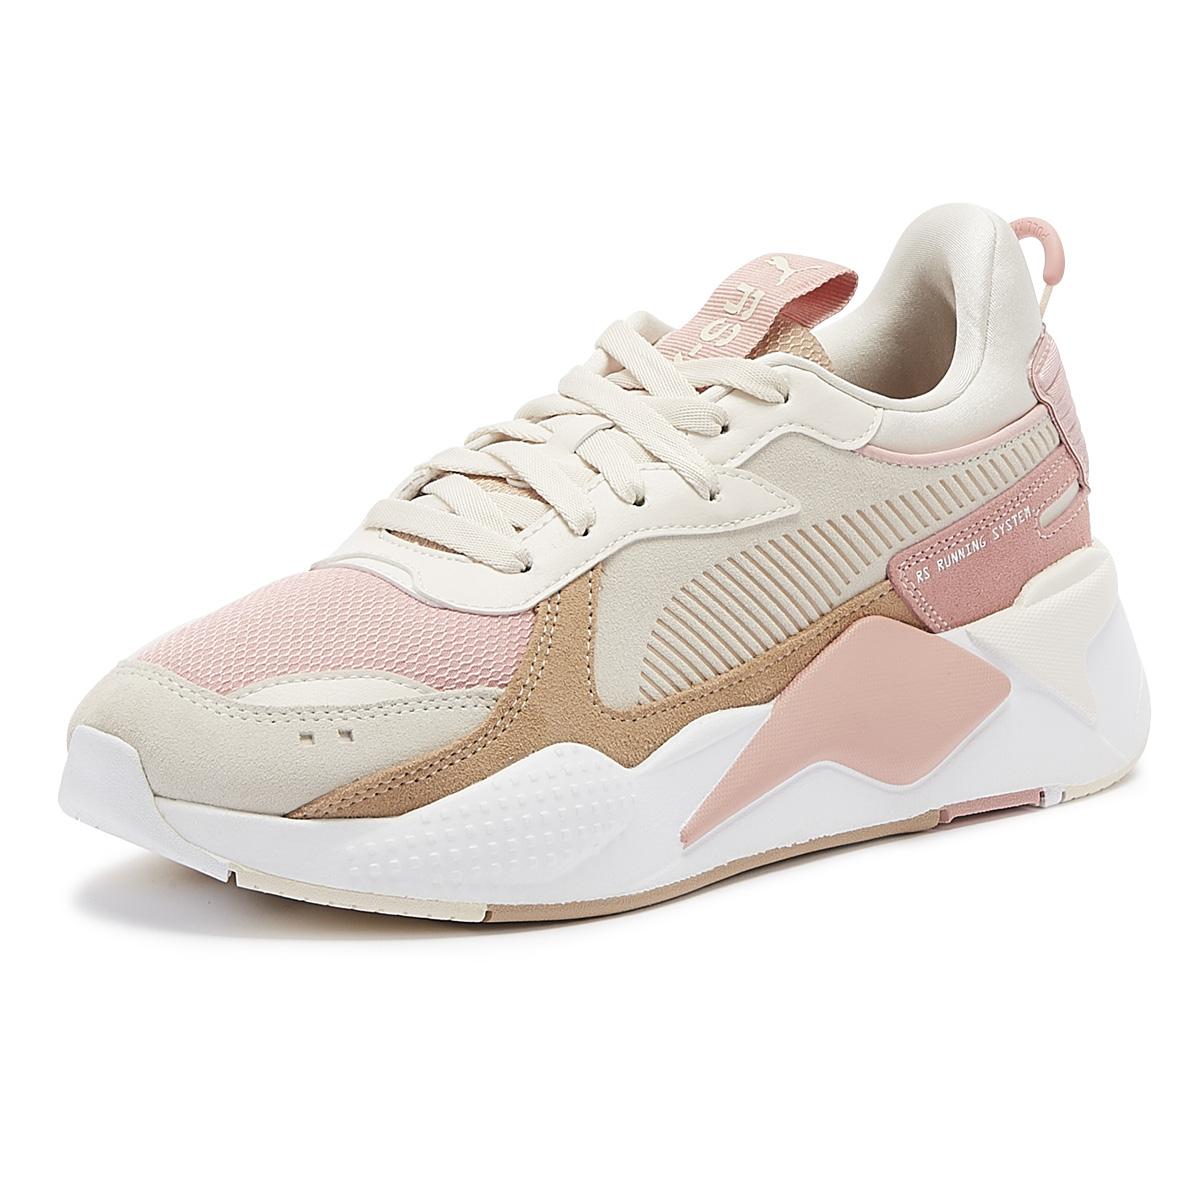 PUMA Rubber Rs-x Reinvent S Bridal Rose Trainers in Pink - Lyst